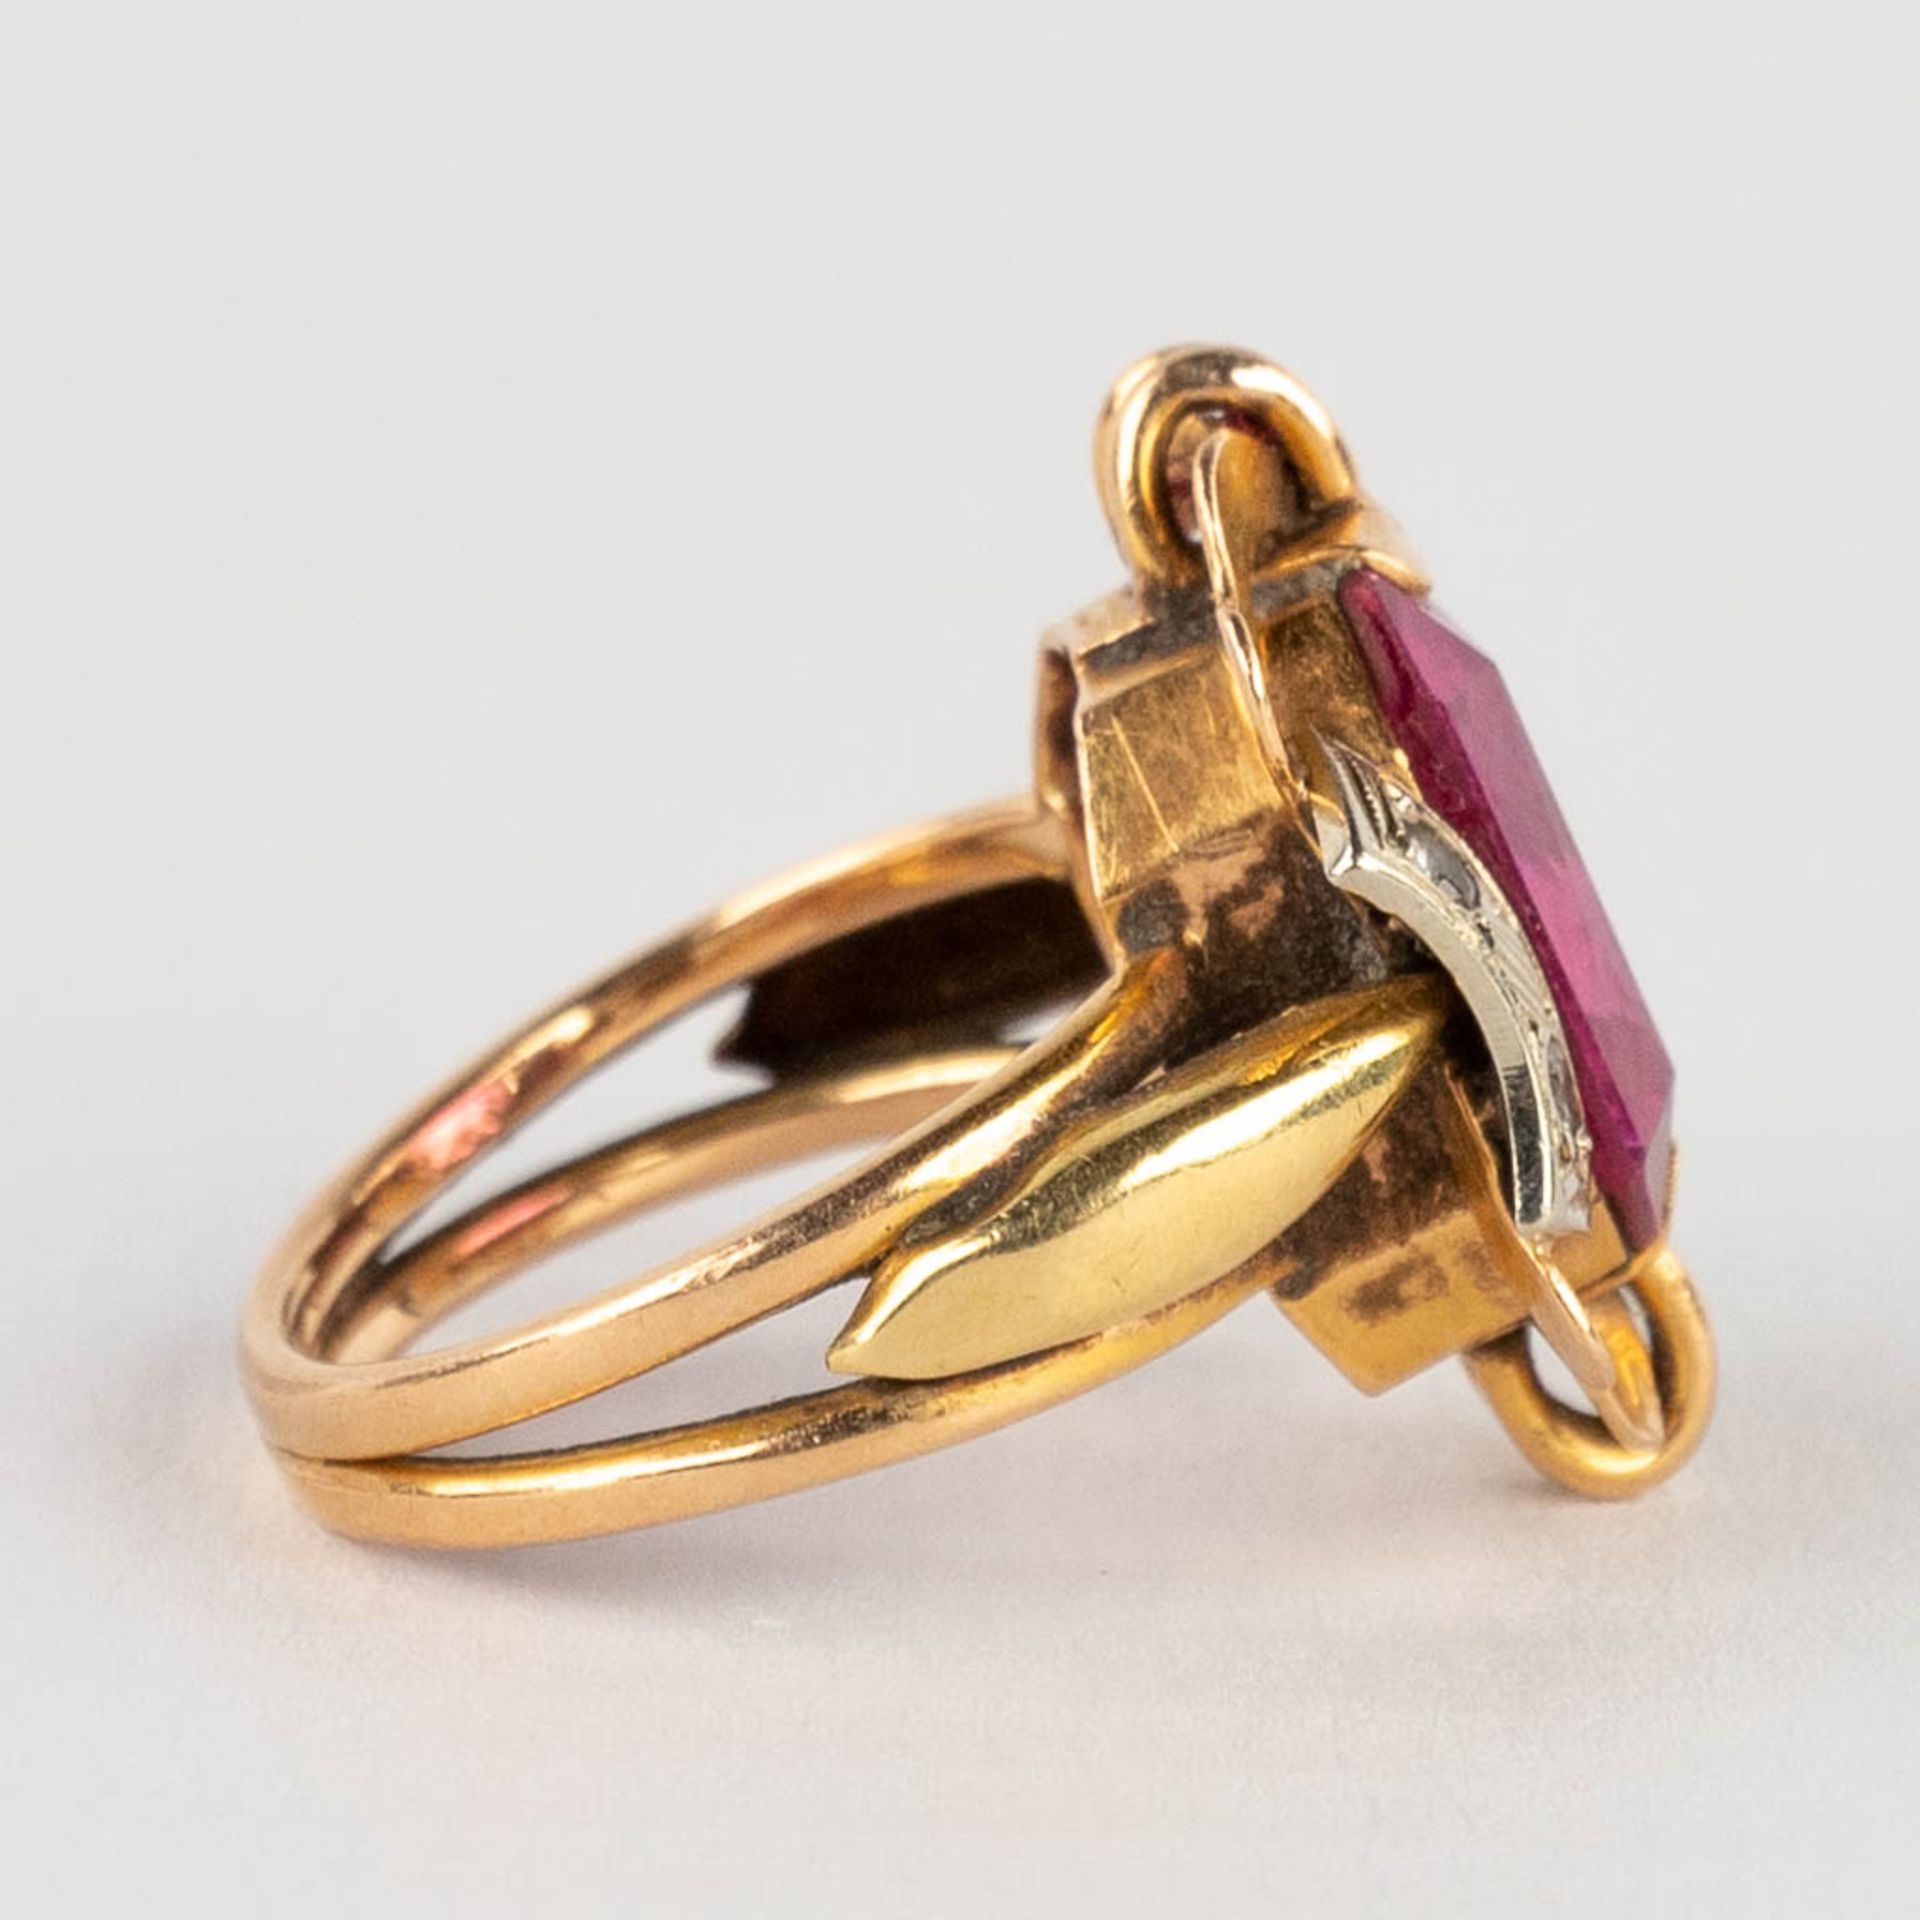 A yellow gold ring with a cut light purple stone/glass. 6,87g. Ring size: 52. - Image 7 of 9